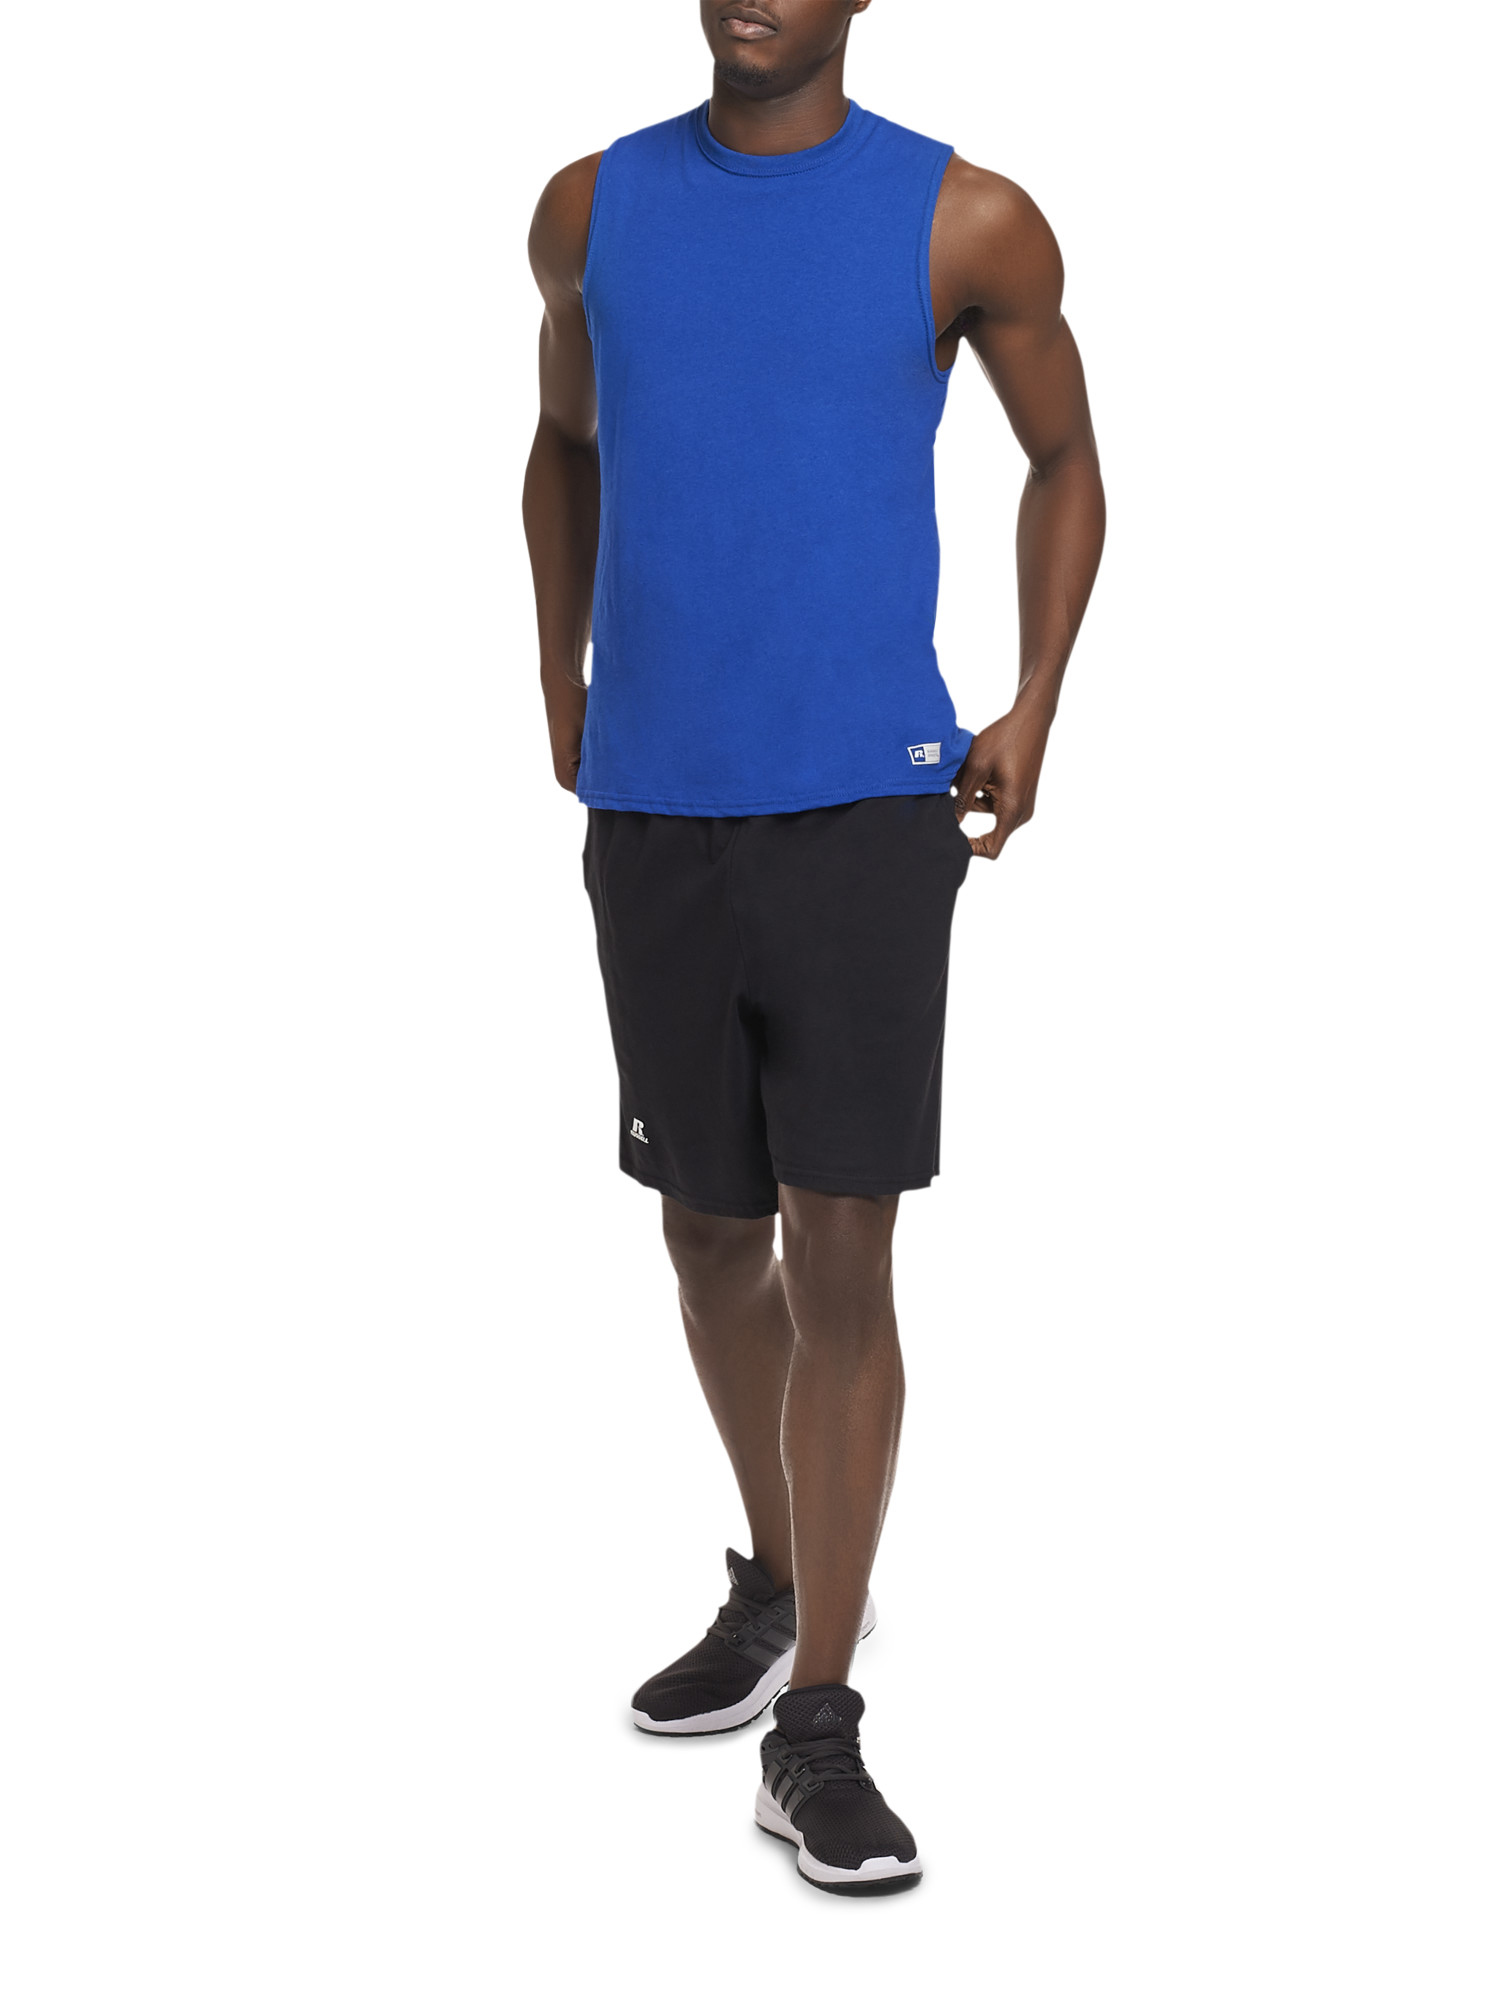 Russell Athletic Men's and Big Men's Basic Cotton Pocket Shorts - image 1 of 5